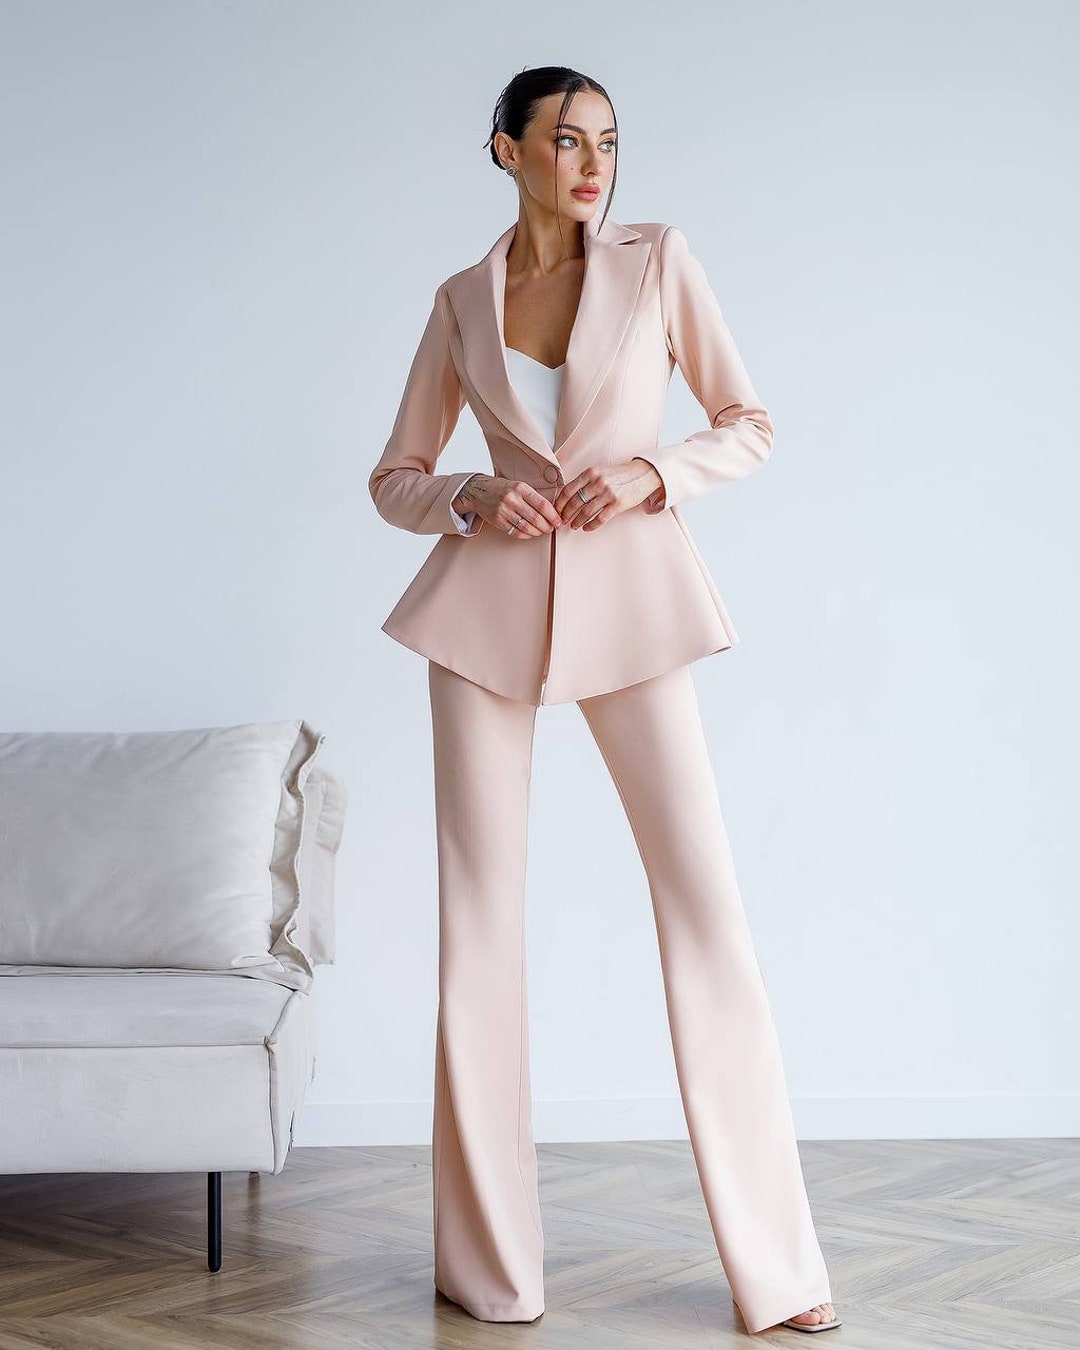 Beige Pantsuit With Peplum Blazer for Women, Combination of Trend and ...